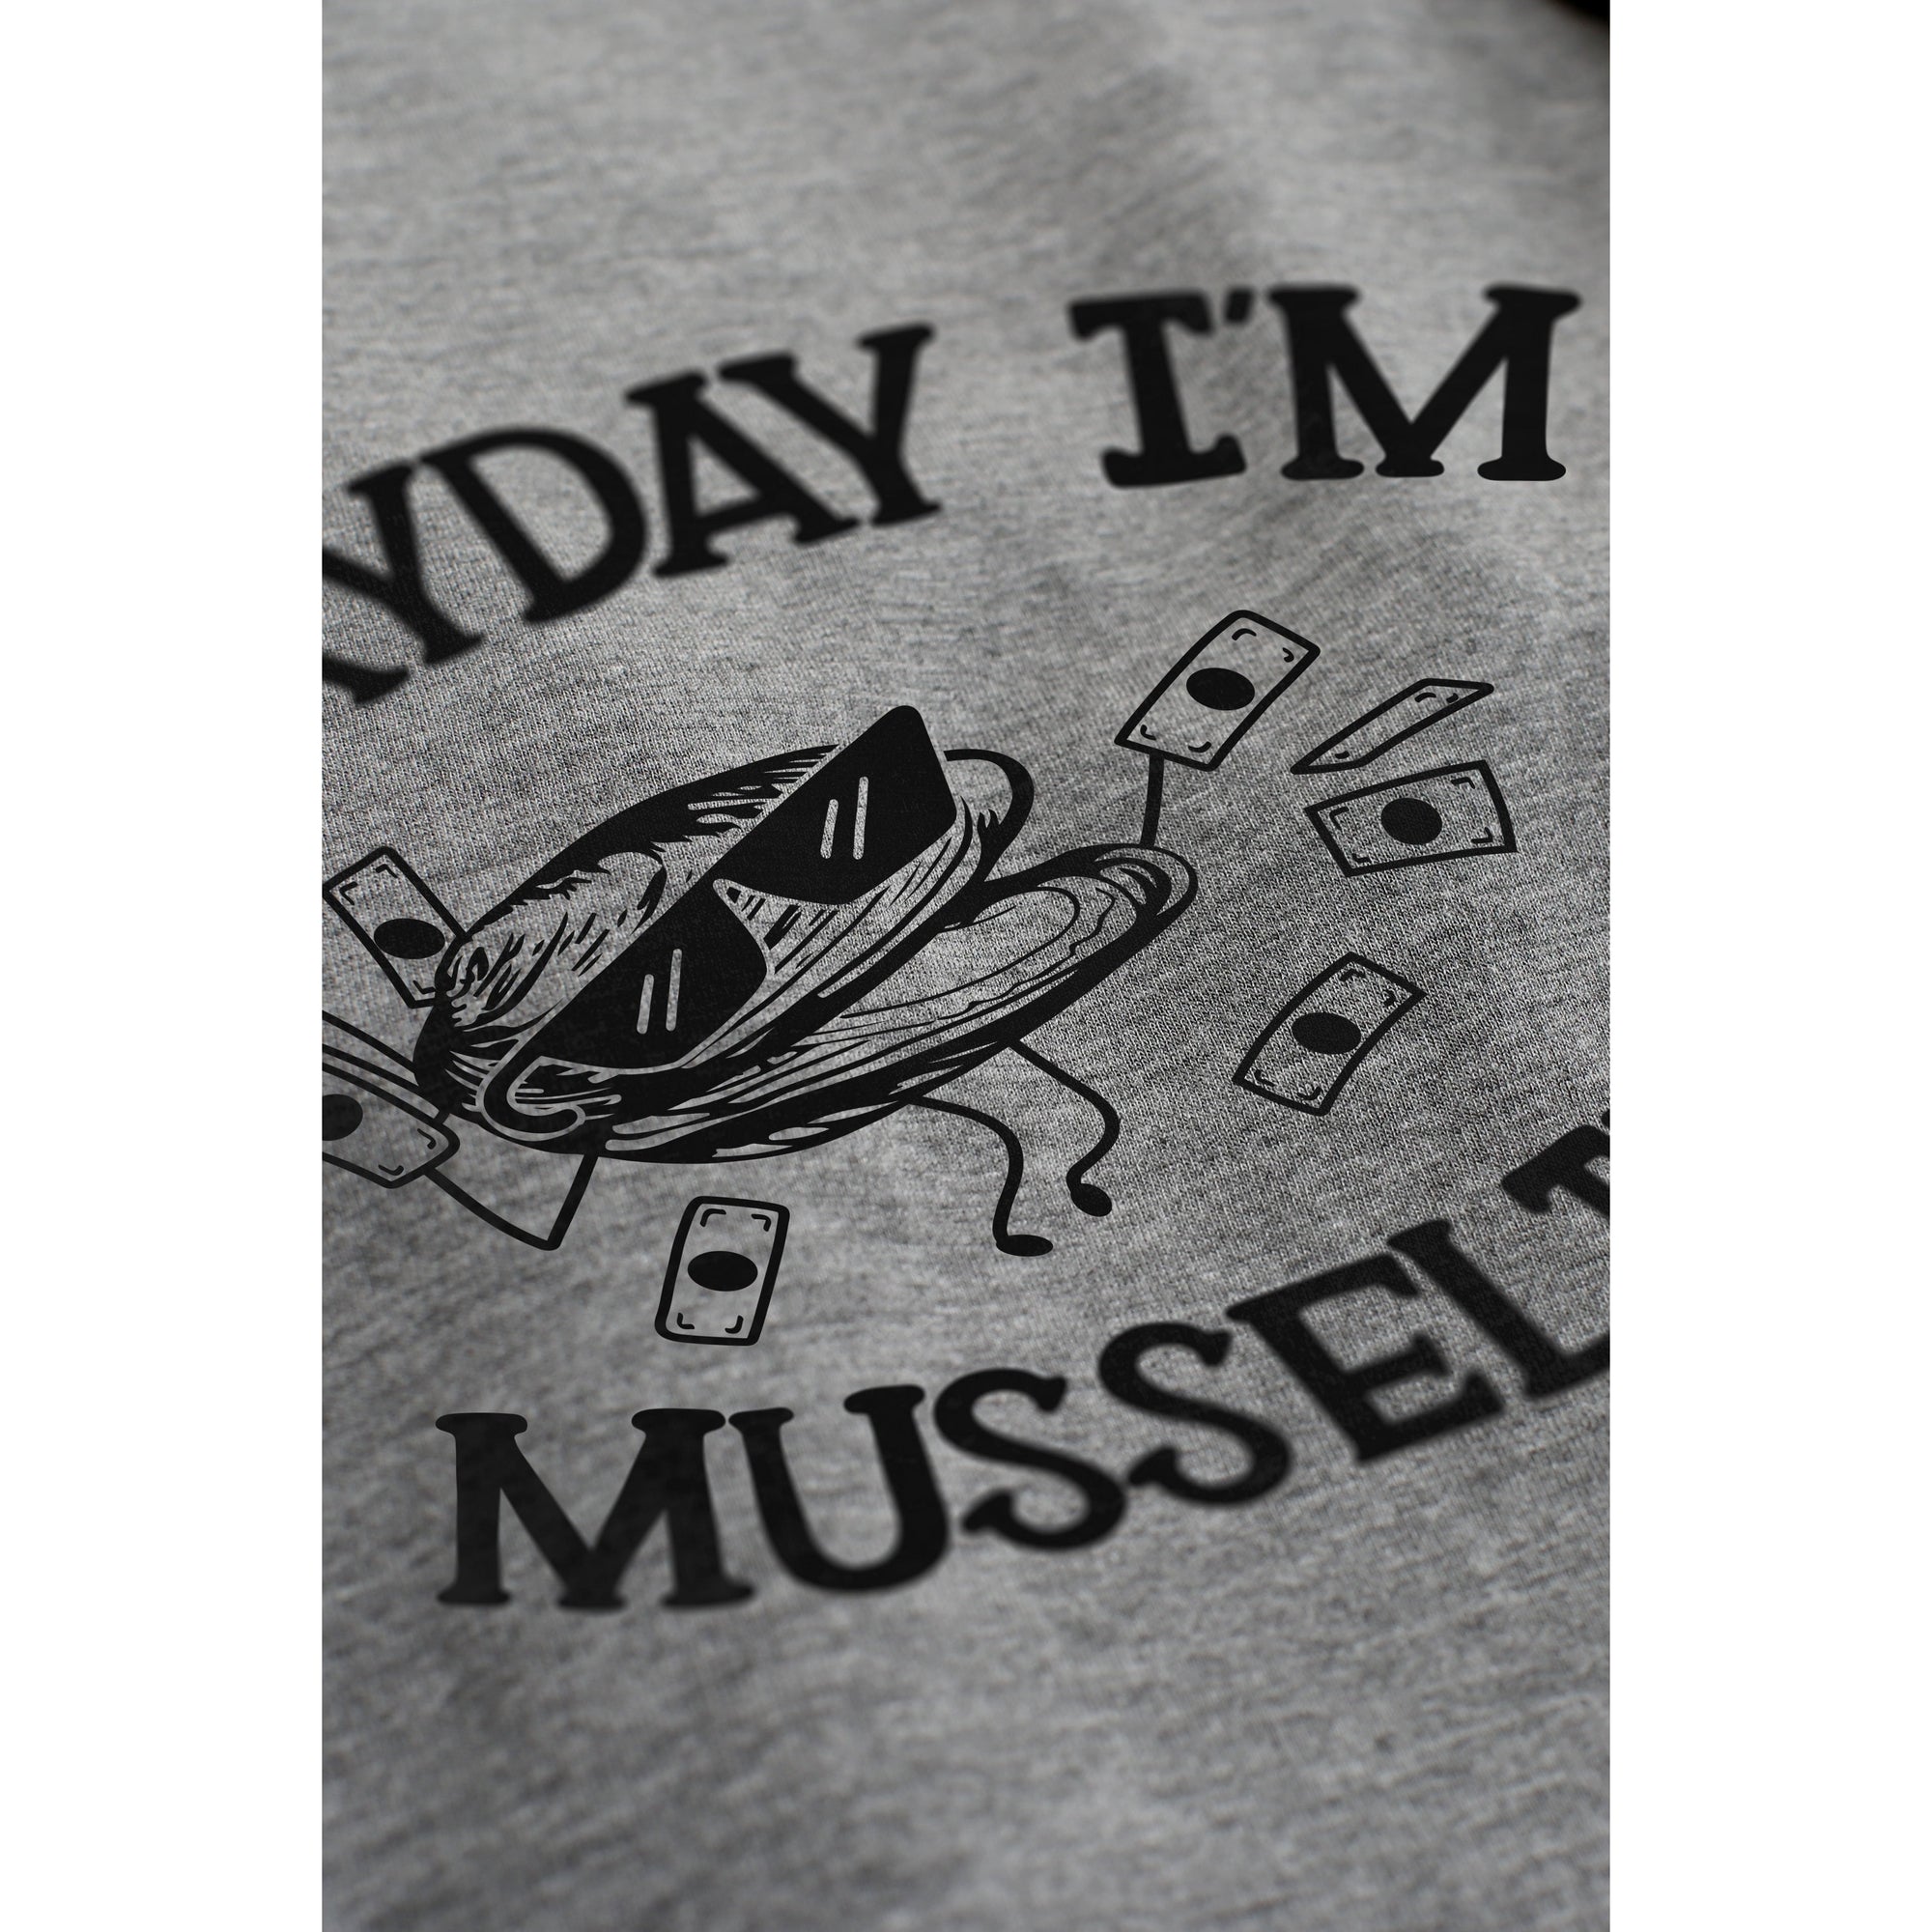 Everyday I'm Musselin - Stories You Can Wear by Thread Tank